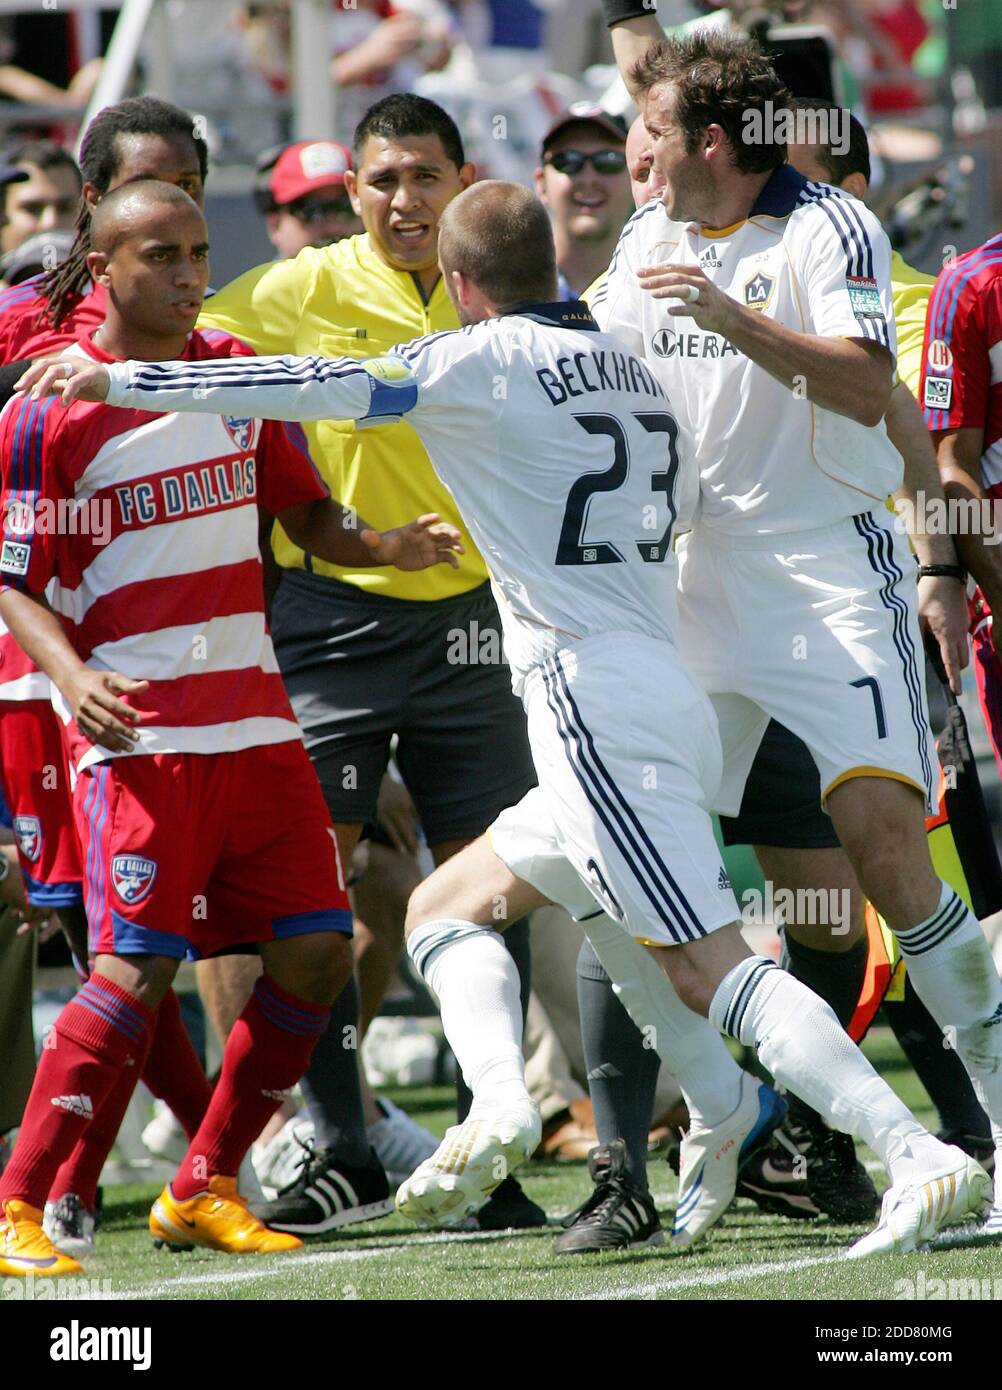 NO FILM, NO VIDEO, NO TV, NO DOCUMENTARY - Los Angeles Galaxy's David Beckham (23) goes after FC Dallas Adrian Serioux, far right, after a serious foul play, as Arturo Alvarez (center) tries to stay between the two and draws a pushing hold card in the final half at Pizza Hut Park in Frisco, TX, USA on May 18, 2008. Photo by Jeffery Washington/Fort Worth Star-Telegram/MCT/Cameleon/ABACAPRESS.COM Stock Photo